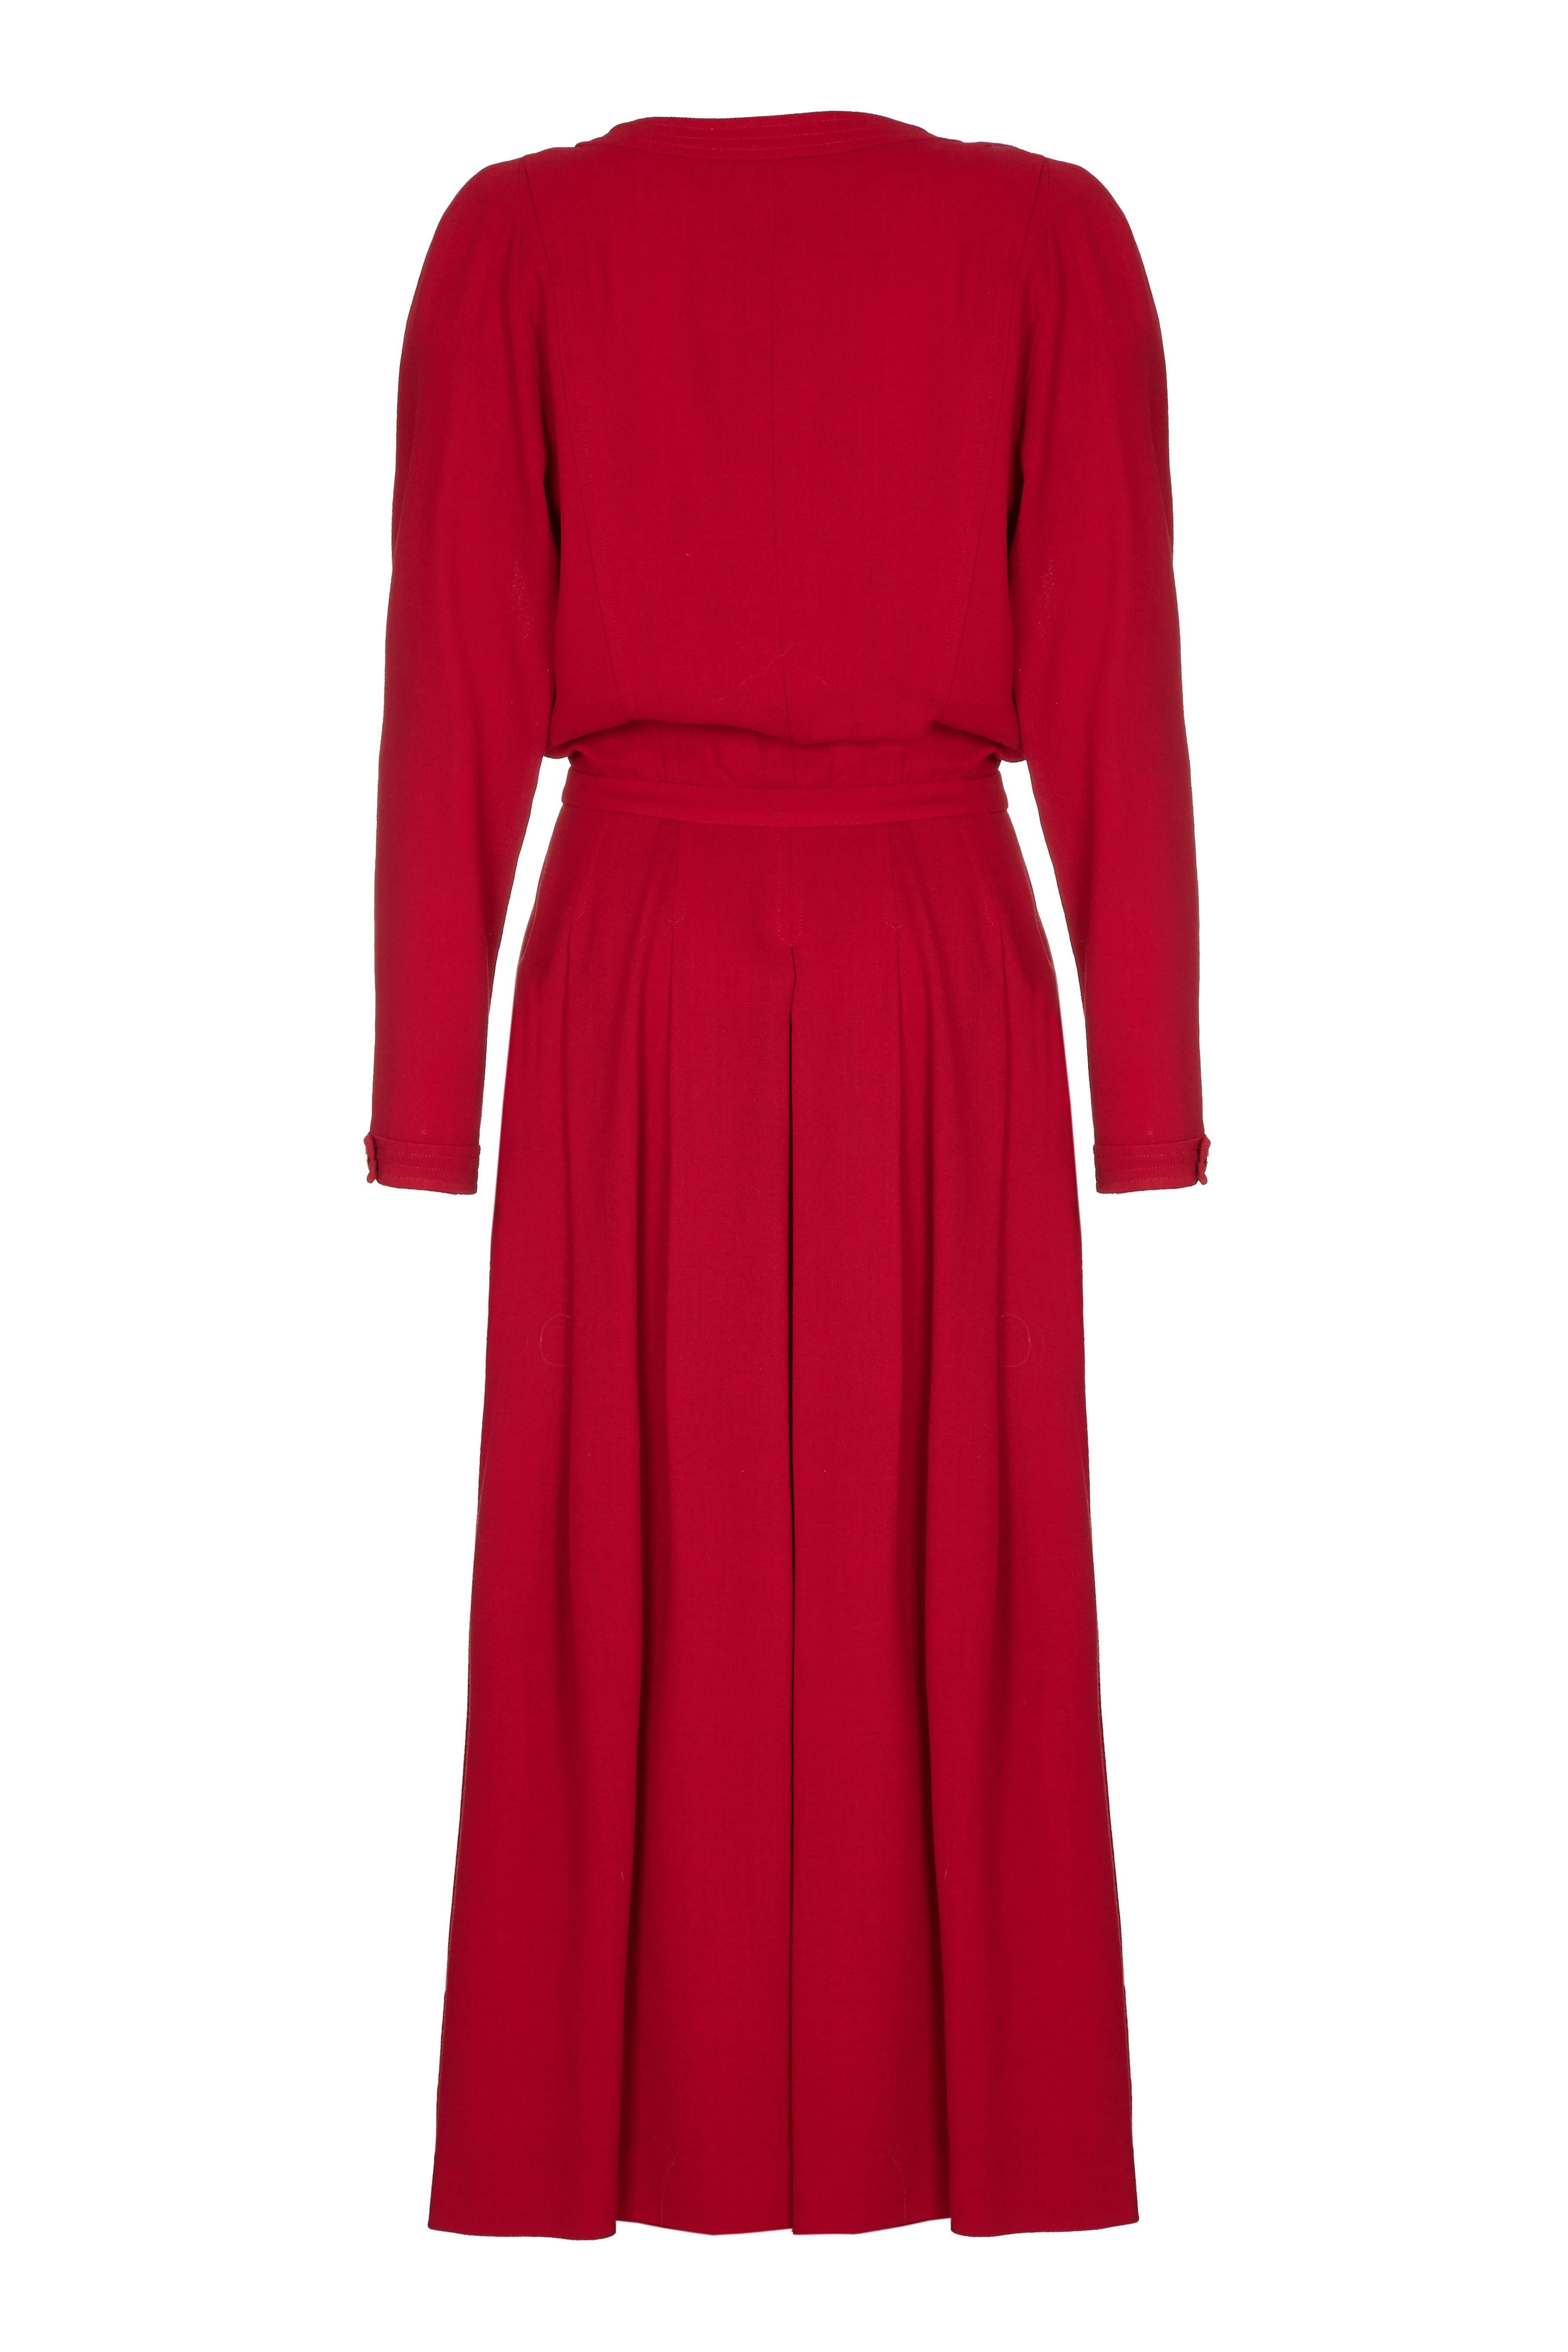 1980s Chanel double breasted red wool dress with gold buttons featuring the profile of the founder, Gabrielle Chanel. Although a looser fit on top it nips in at the waist and flares out to give the appearance of separates. Has full length sleeves